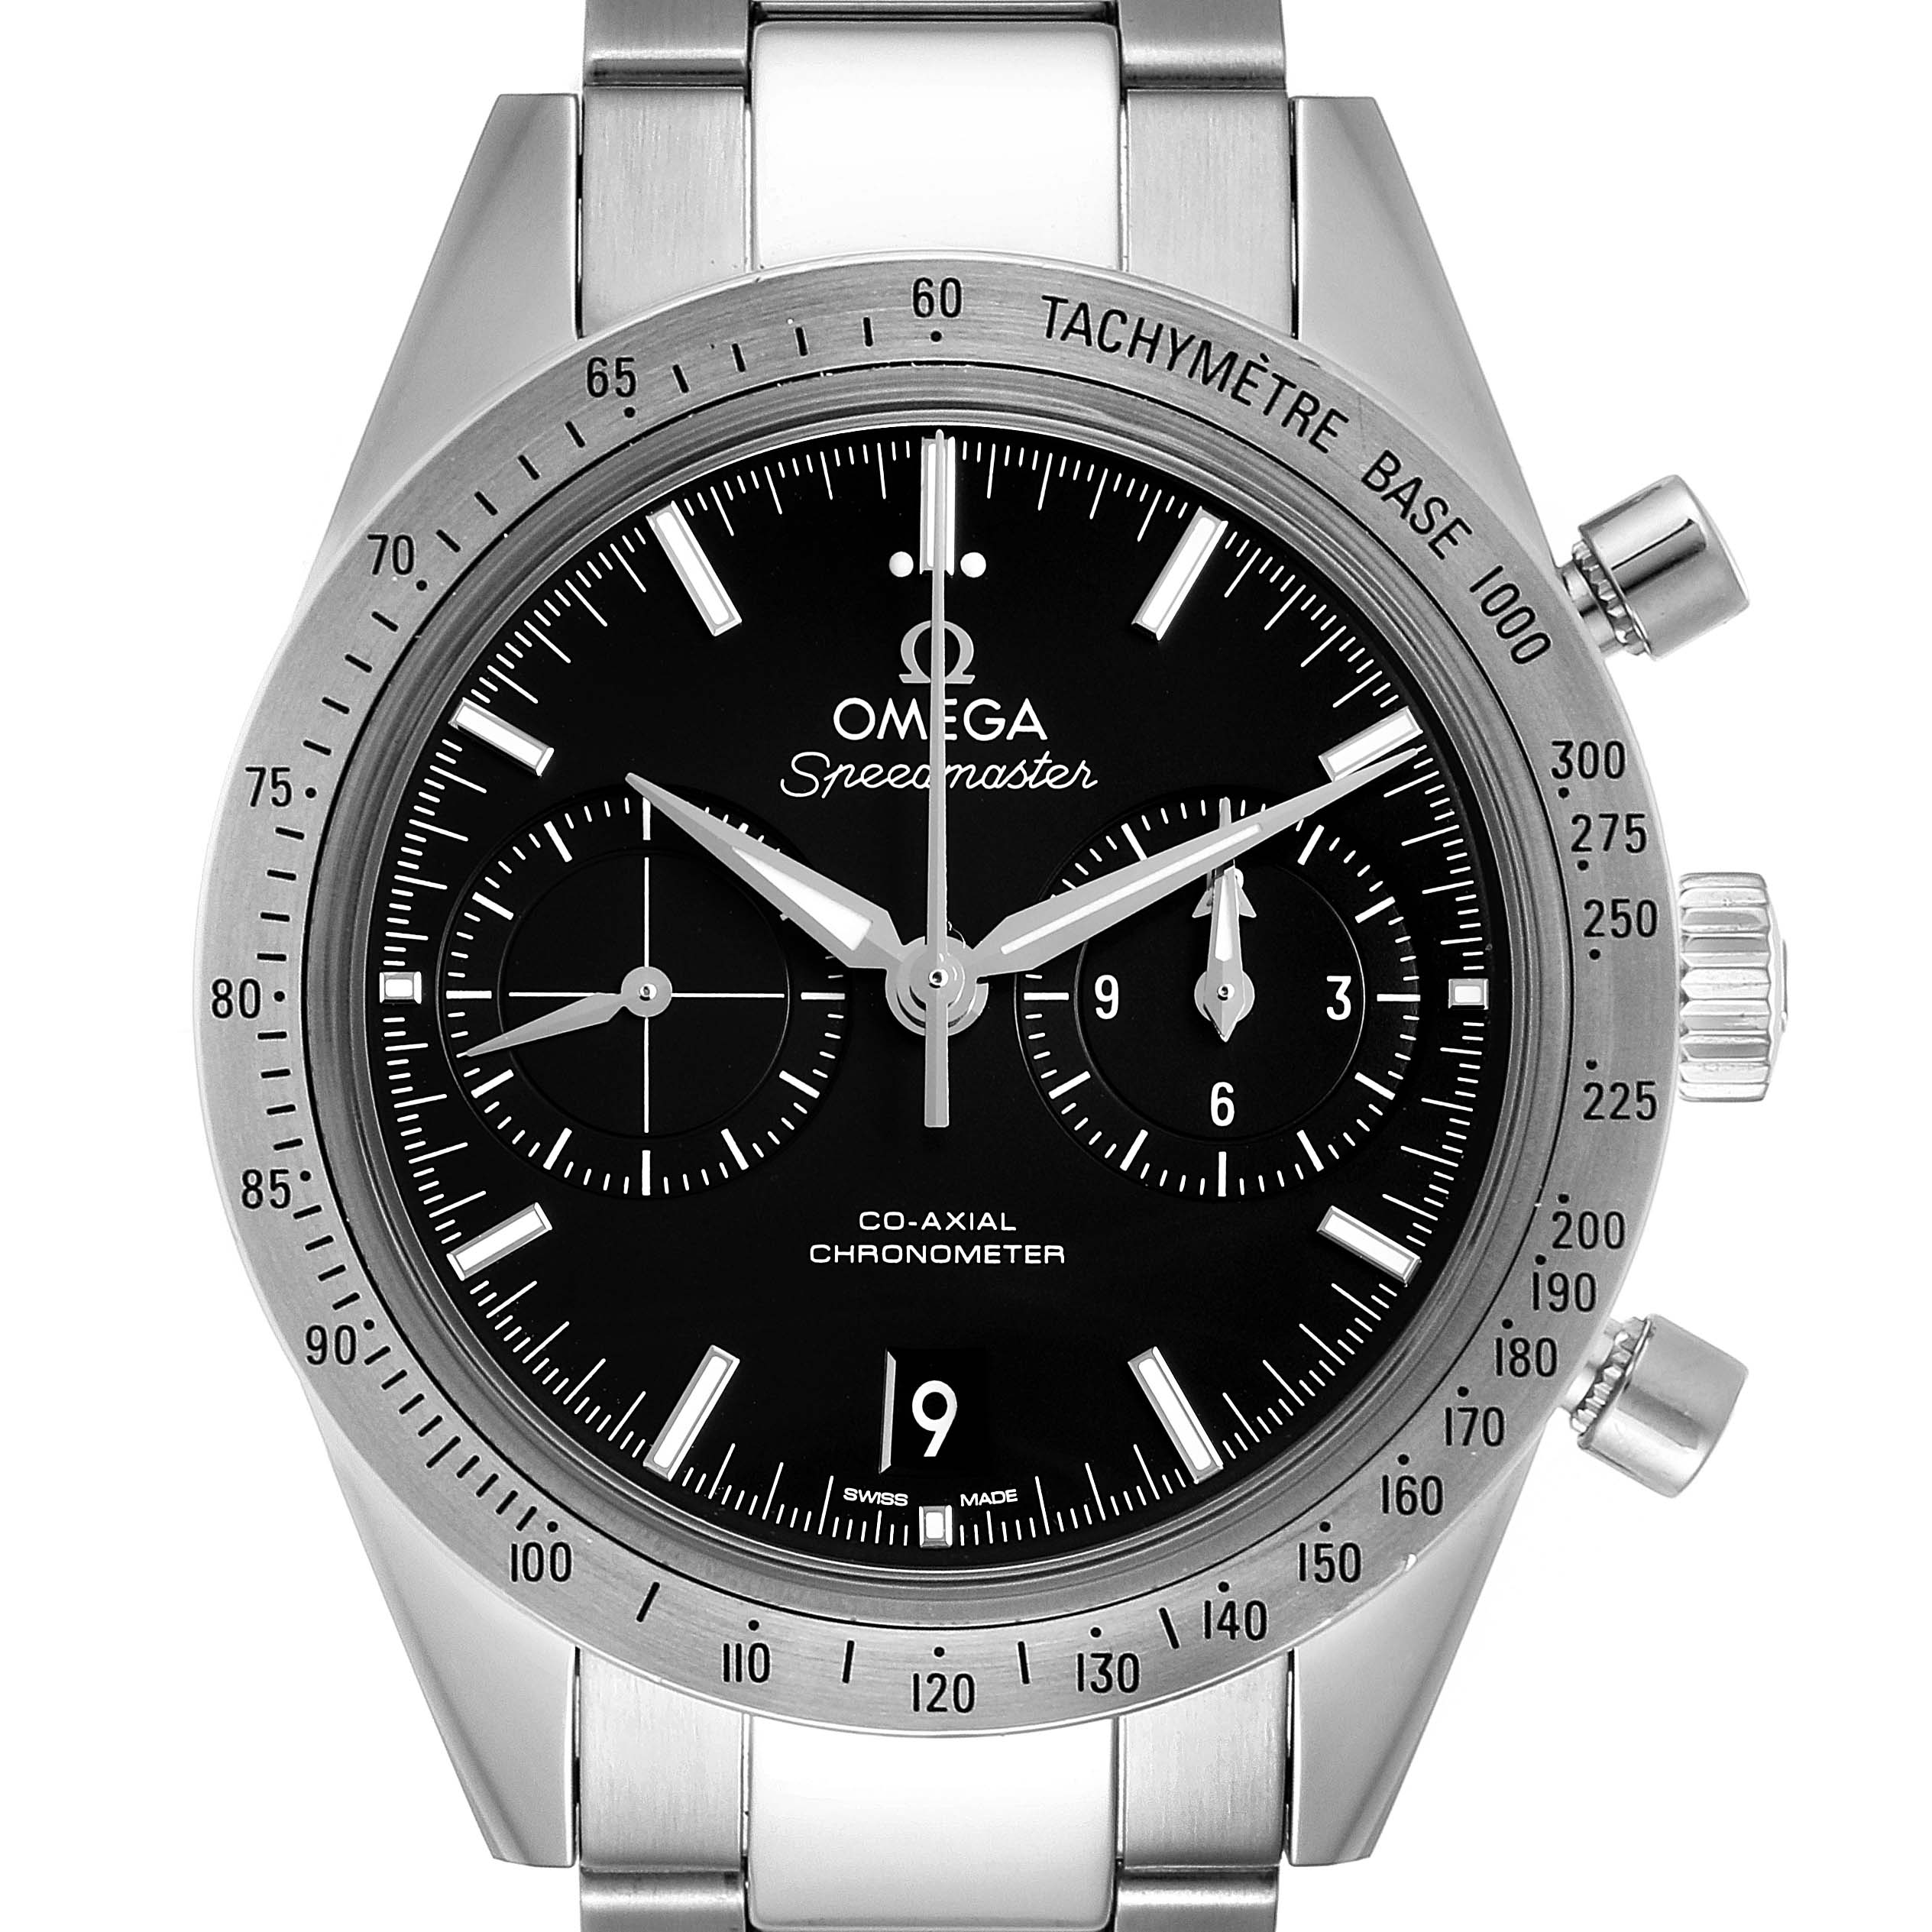 Omega Speedmaster 57 Co-Axial Chronograph Watch 331.10.42.51.01.001 ...